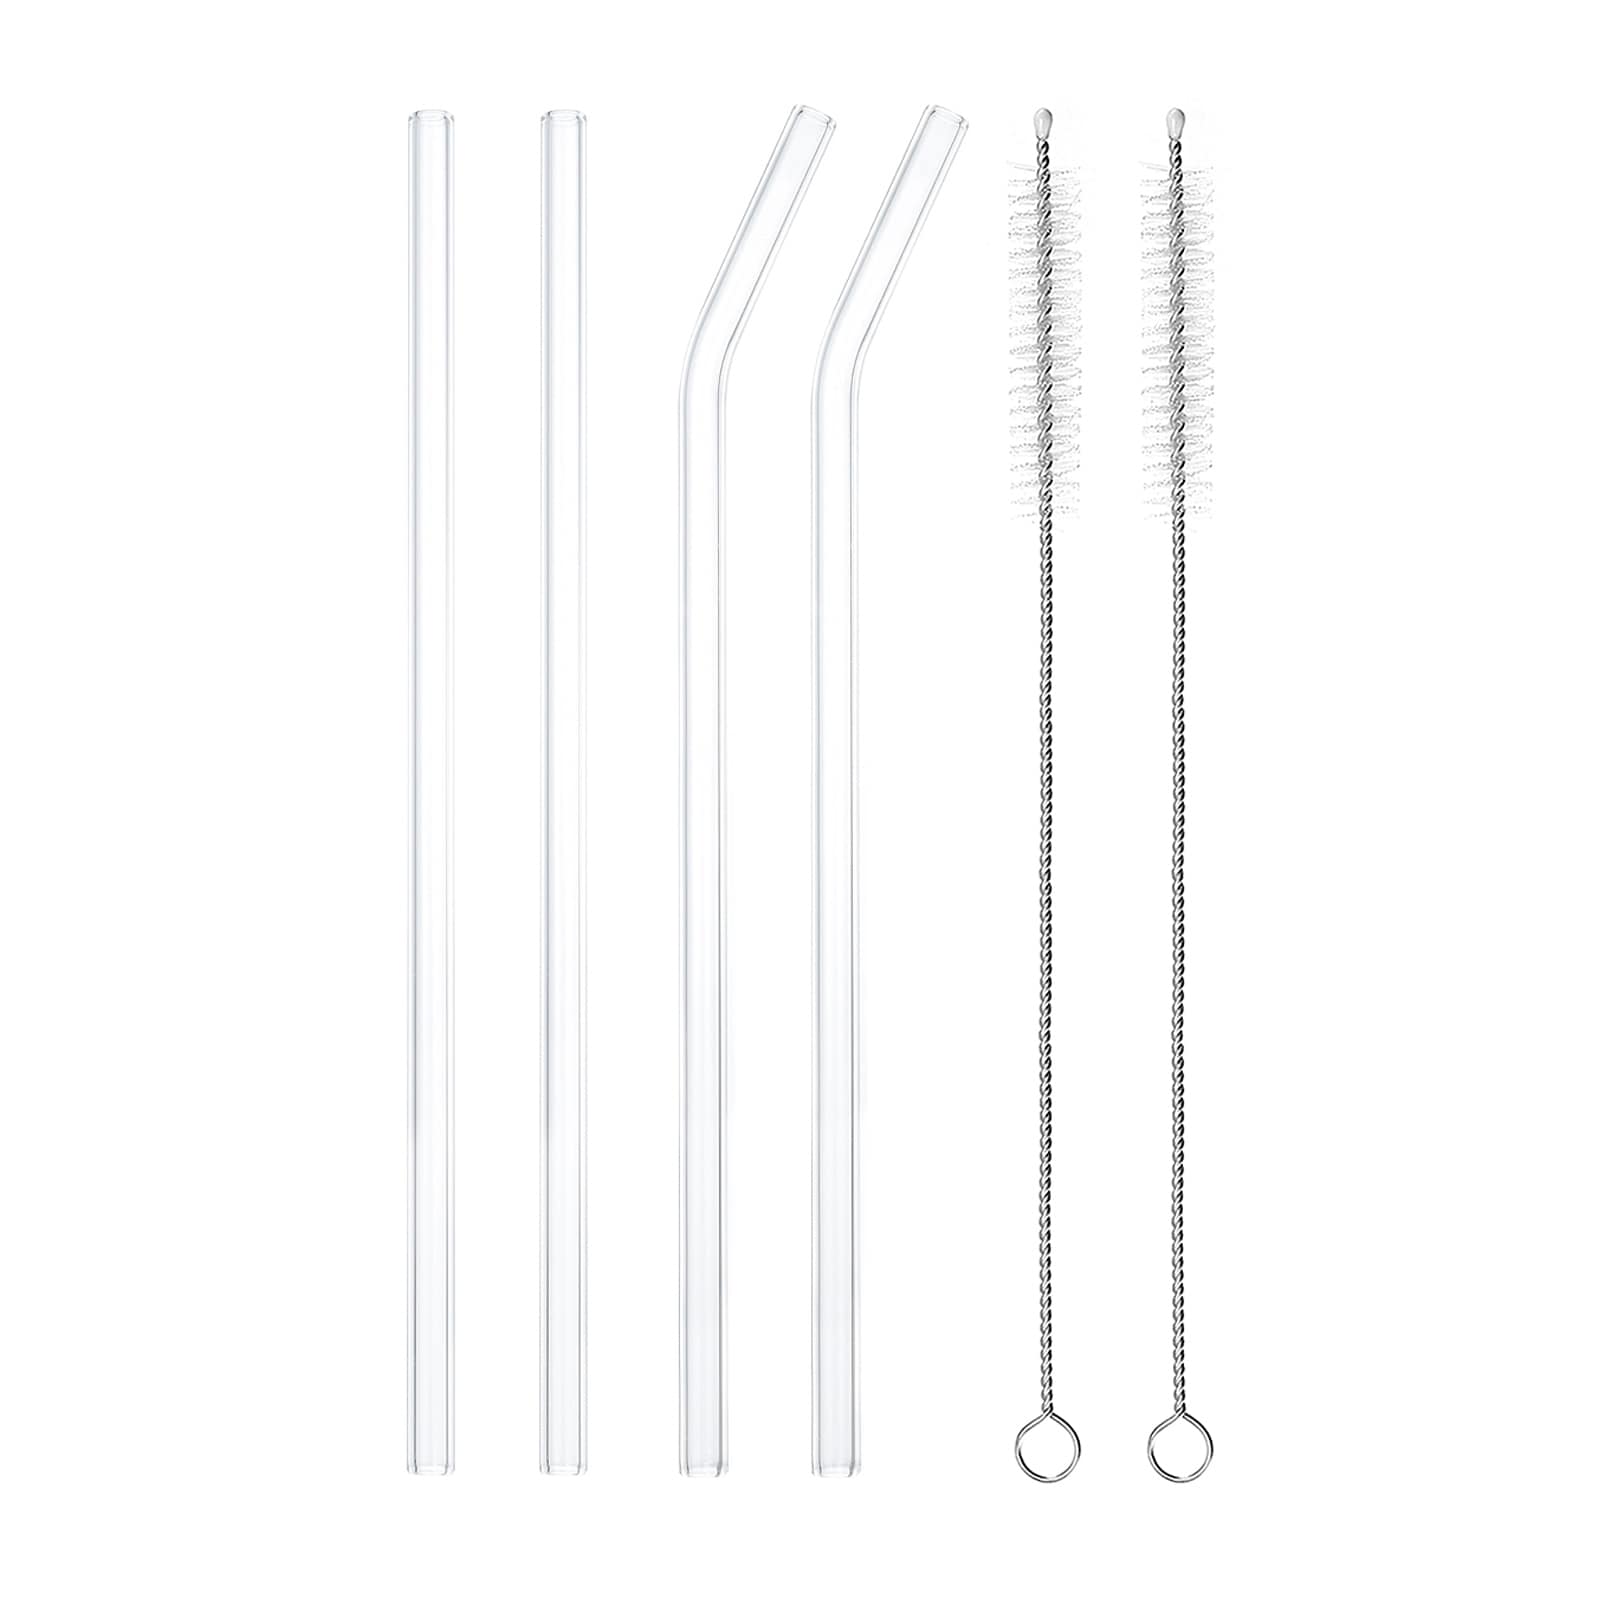 https://ak1.ostkcdn.com/images/products/is/images/direct/c0d9b3edf56797bfb22b5ae7eb20f11d8d3c42b7/Reusable-Straws-Glass-Straw%2C-4pcs-Straw-with-Two-Cleaning-Brush.jpg